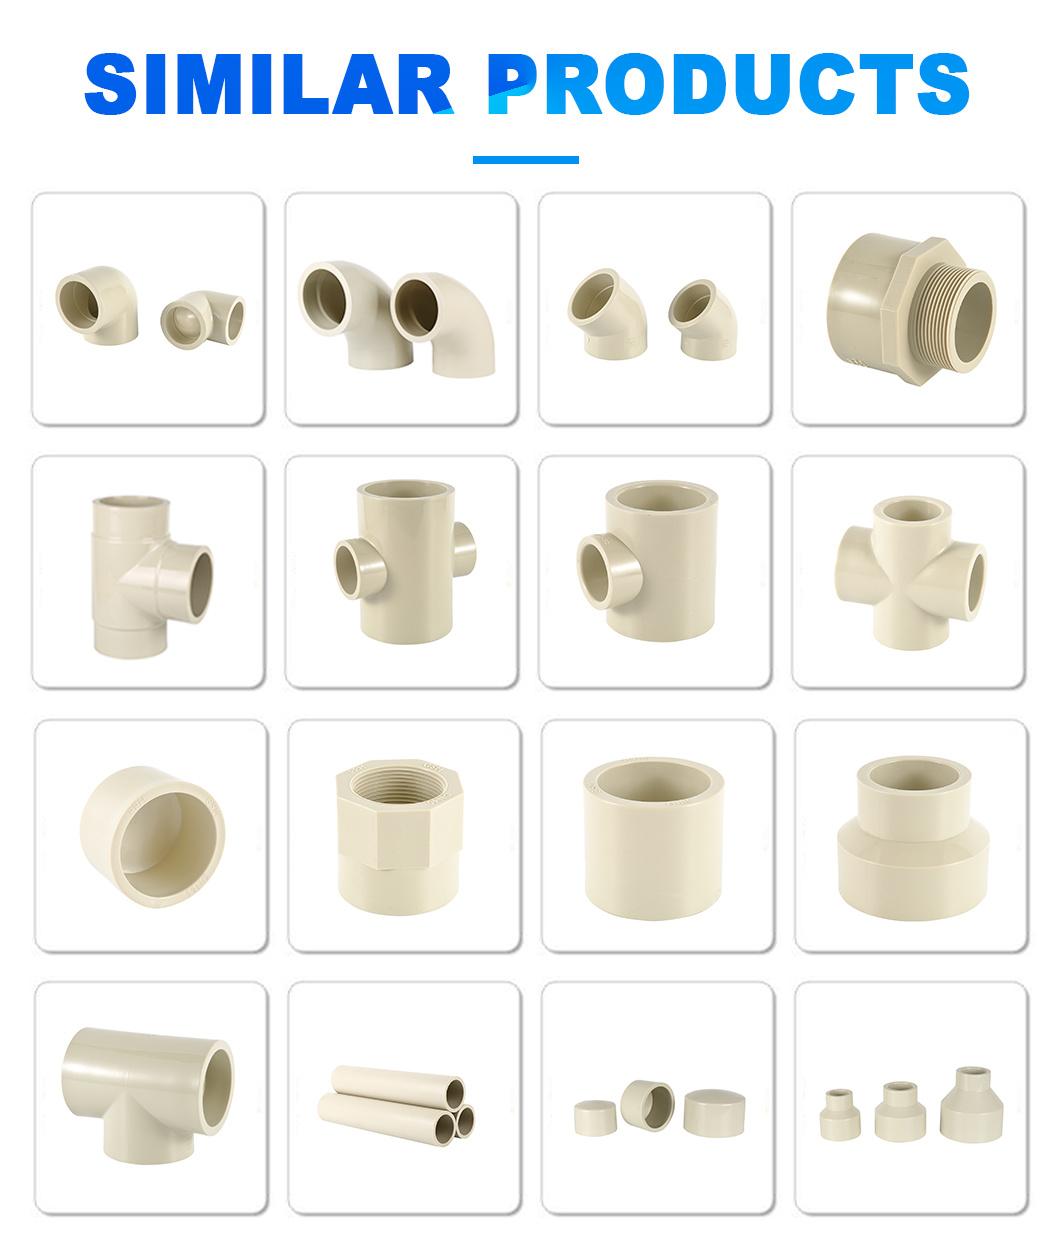 Pph Pipe Fittings Plastic Welding Imported Raw Materials Van Stone Flange